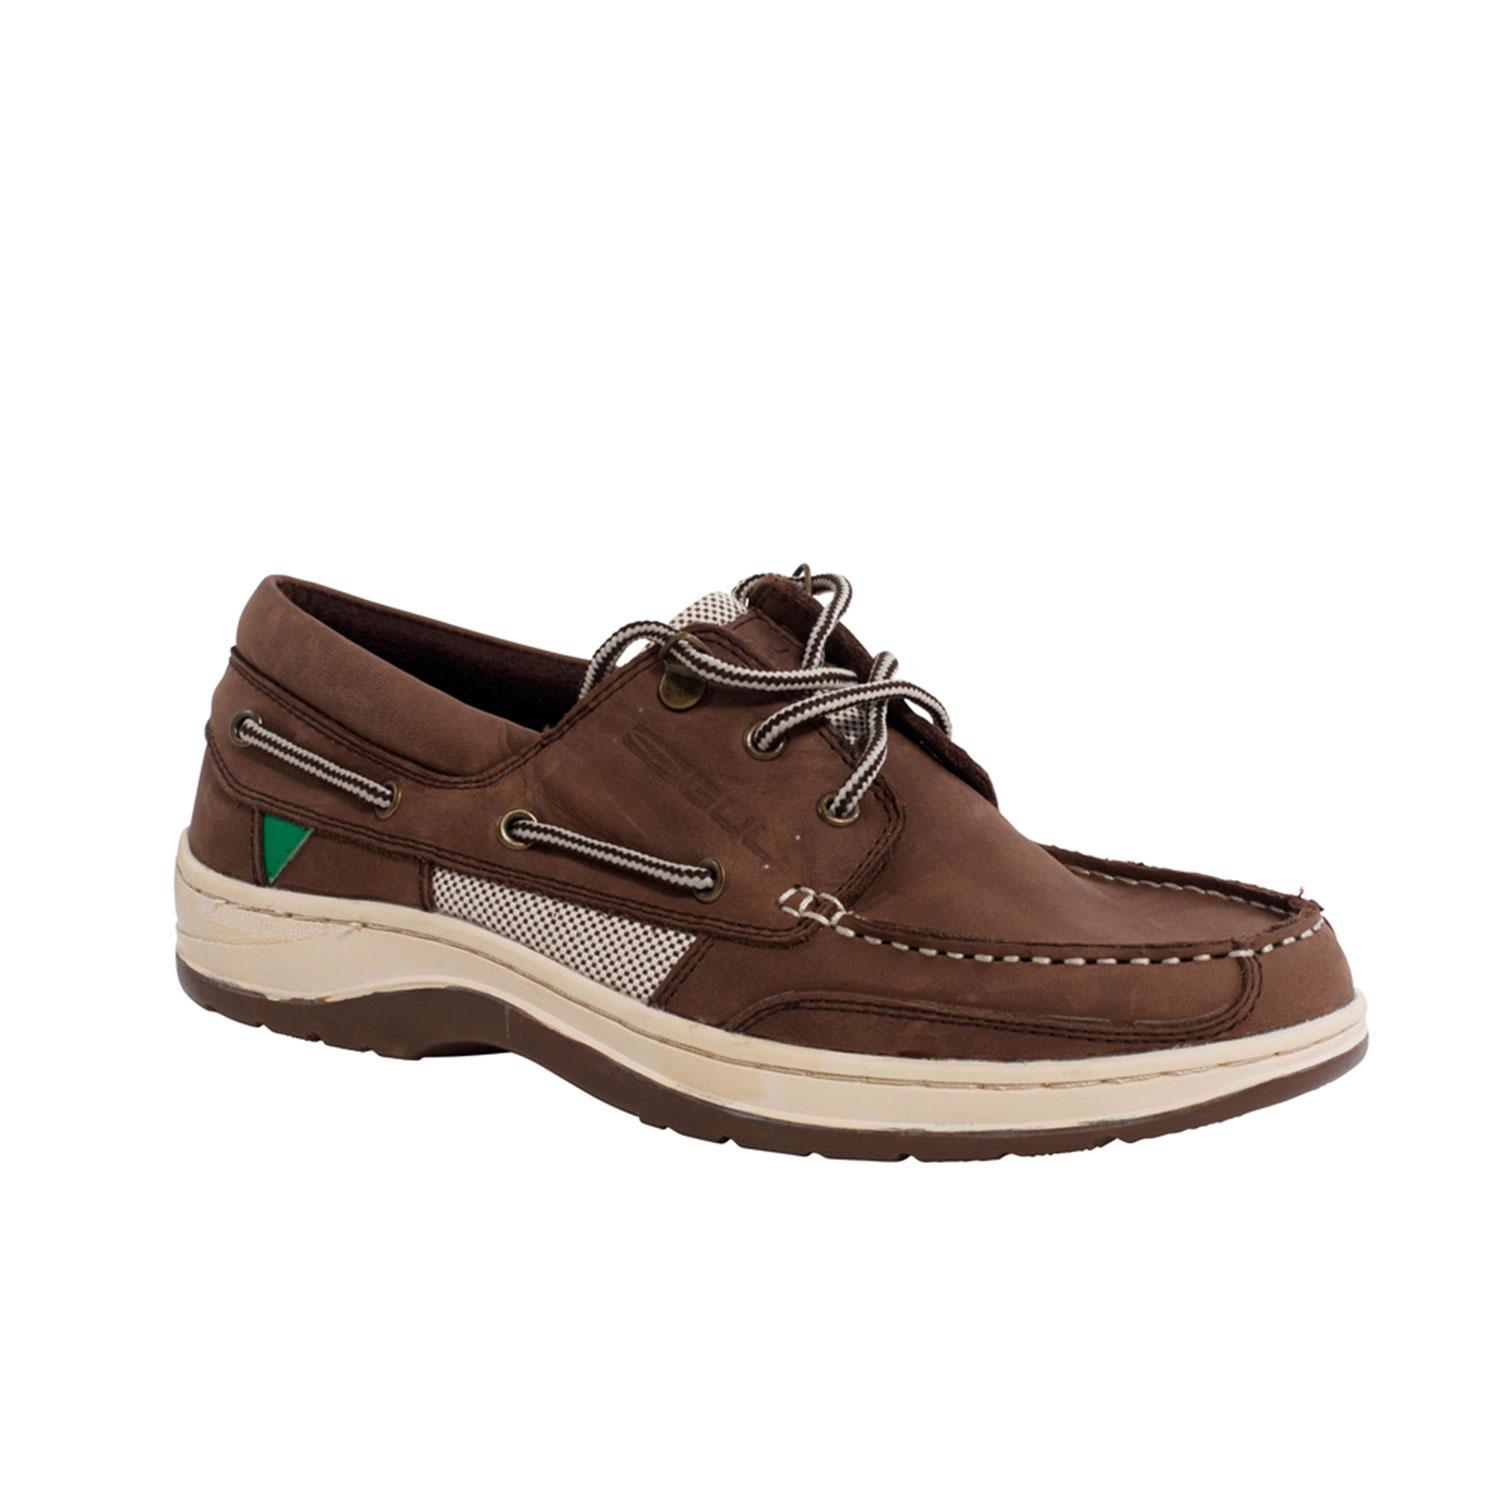 Gul Falmouth Leather Deck Shoes / Boat 